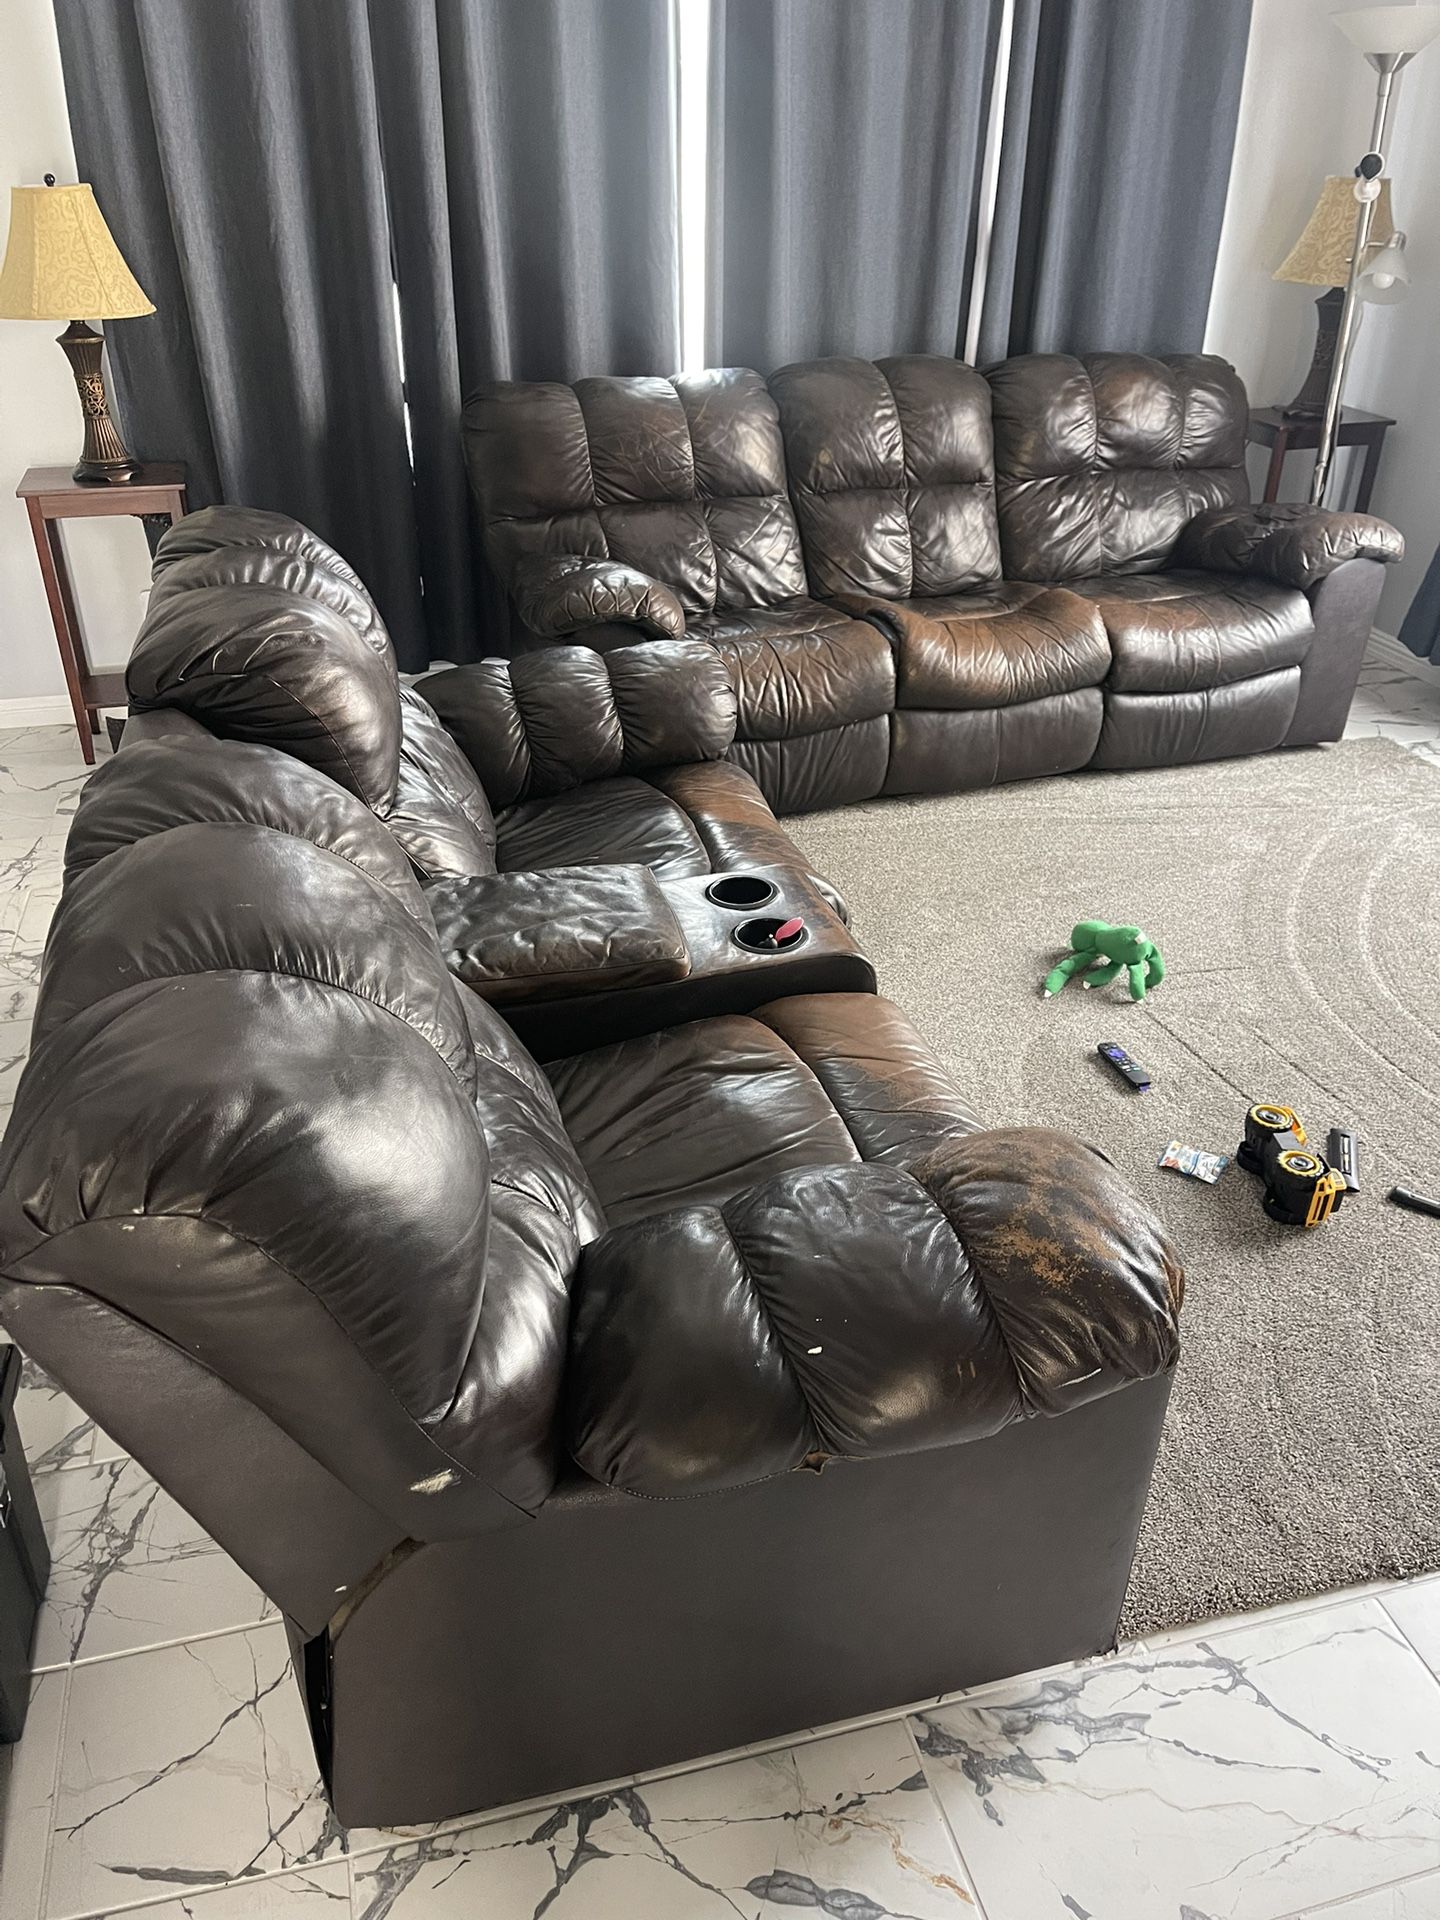 Reclining Leather Sofa Set 200 Or Best Offer